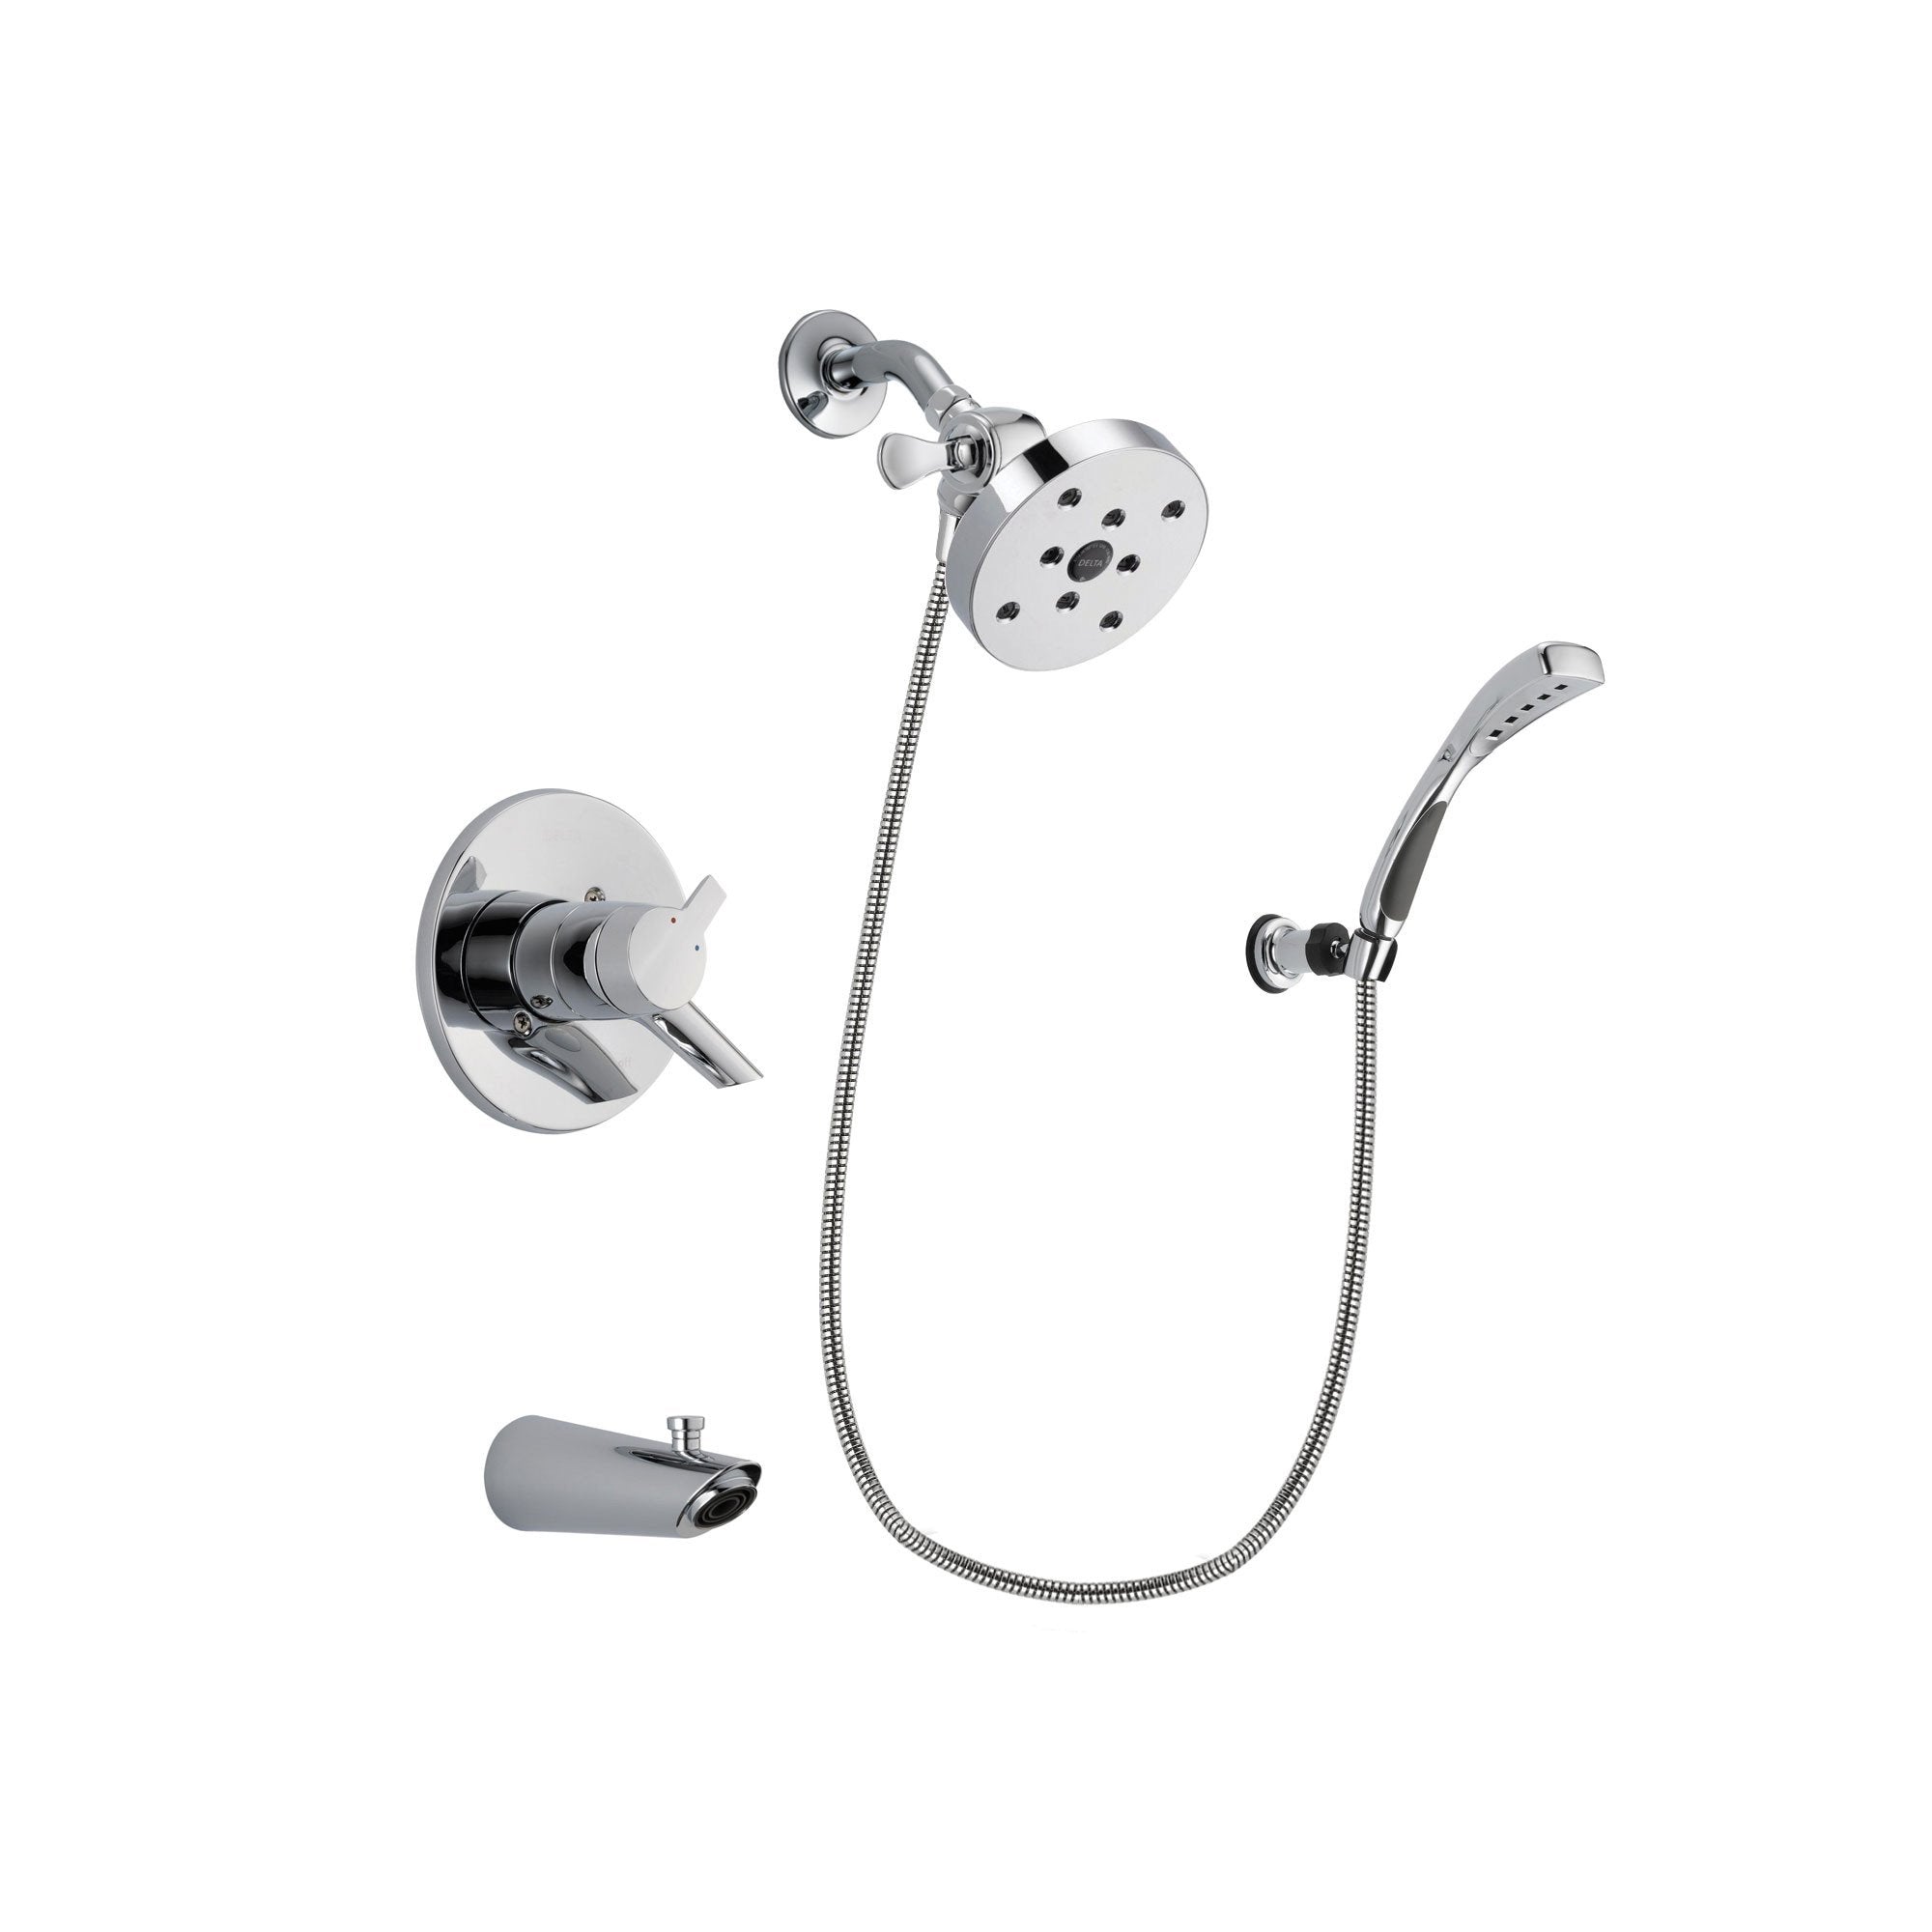 Delta Compel Chrome Finish Dual Control Tub and Shower Faucet System Package with 5-1/2 inch Shower Head and Wall-Mount Bracket with Handheld Shower Spray Includes Rough-in Valve and Tub Spout DSP1095V